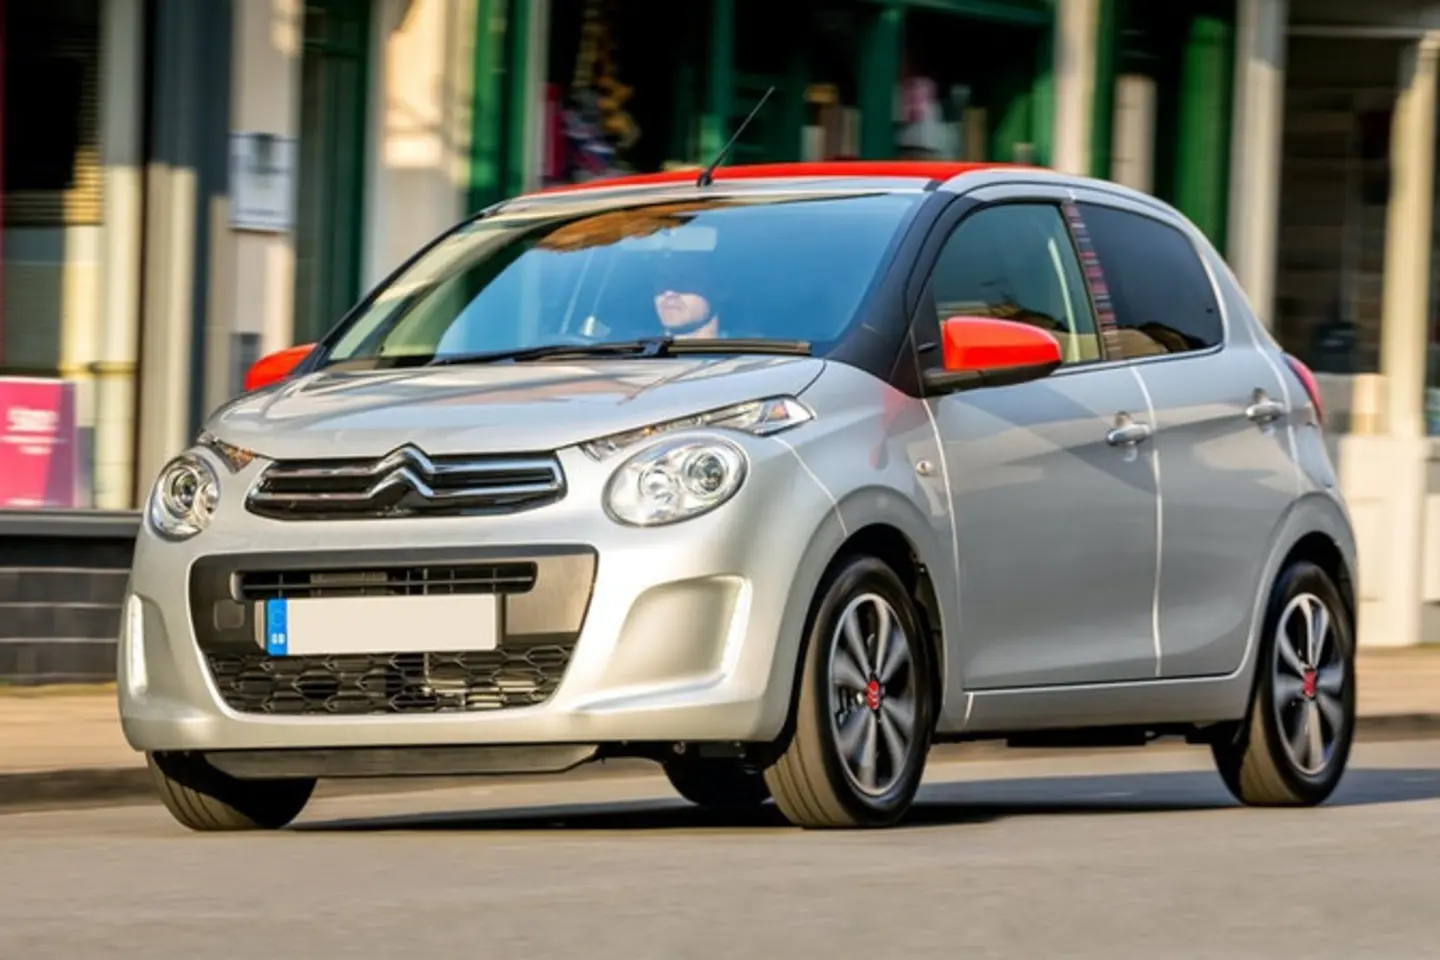 The front exterior of a silver Citroen C1